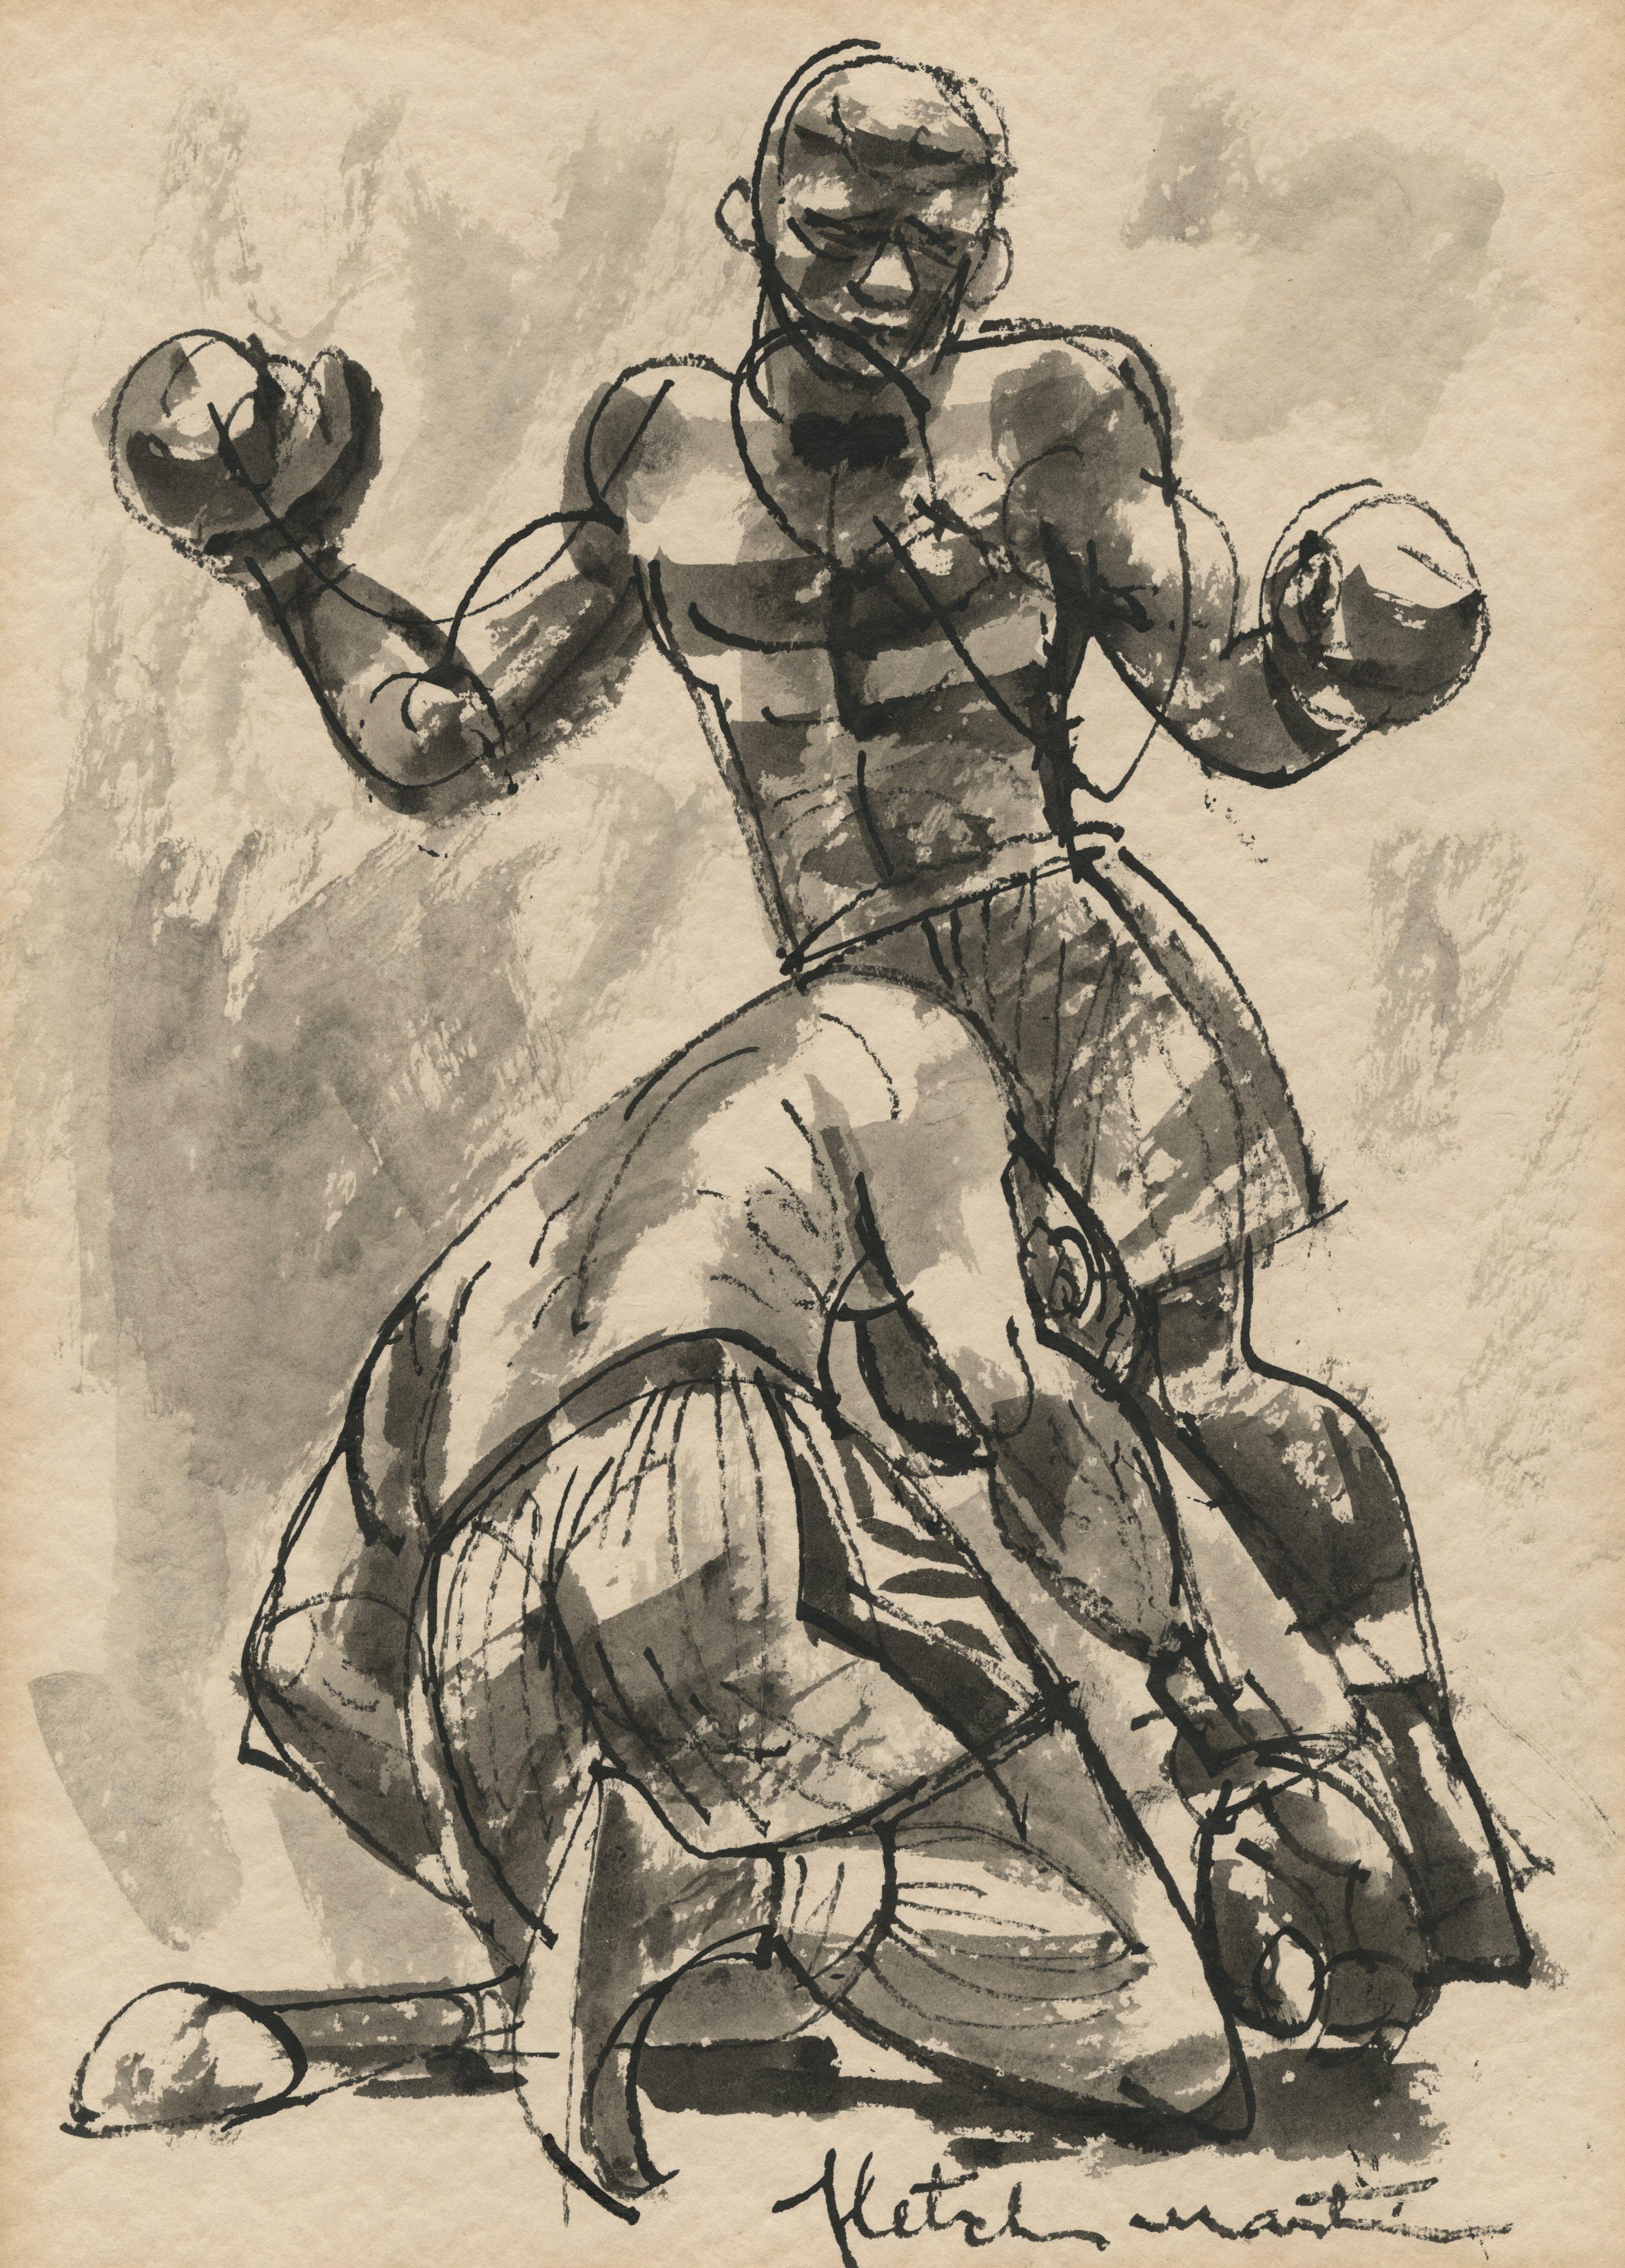 Fletcher Martin Figurative Art - Untitled (Joe Louis knocking out Max Schmeling in 1938 rematch)